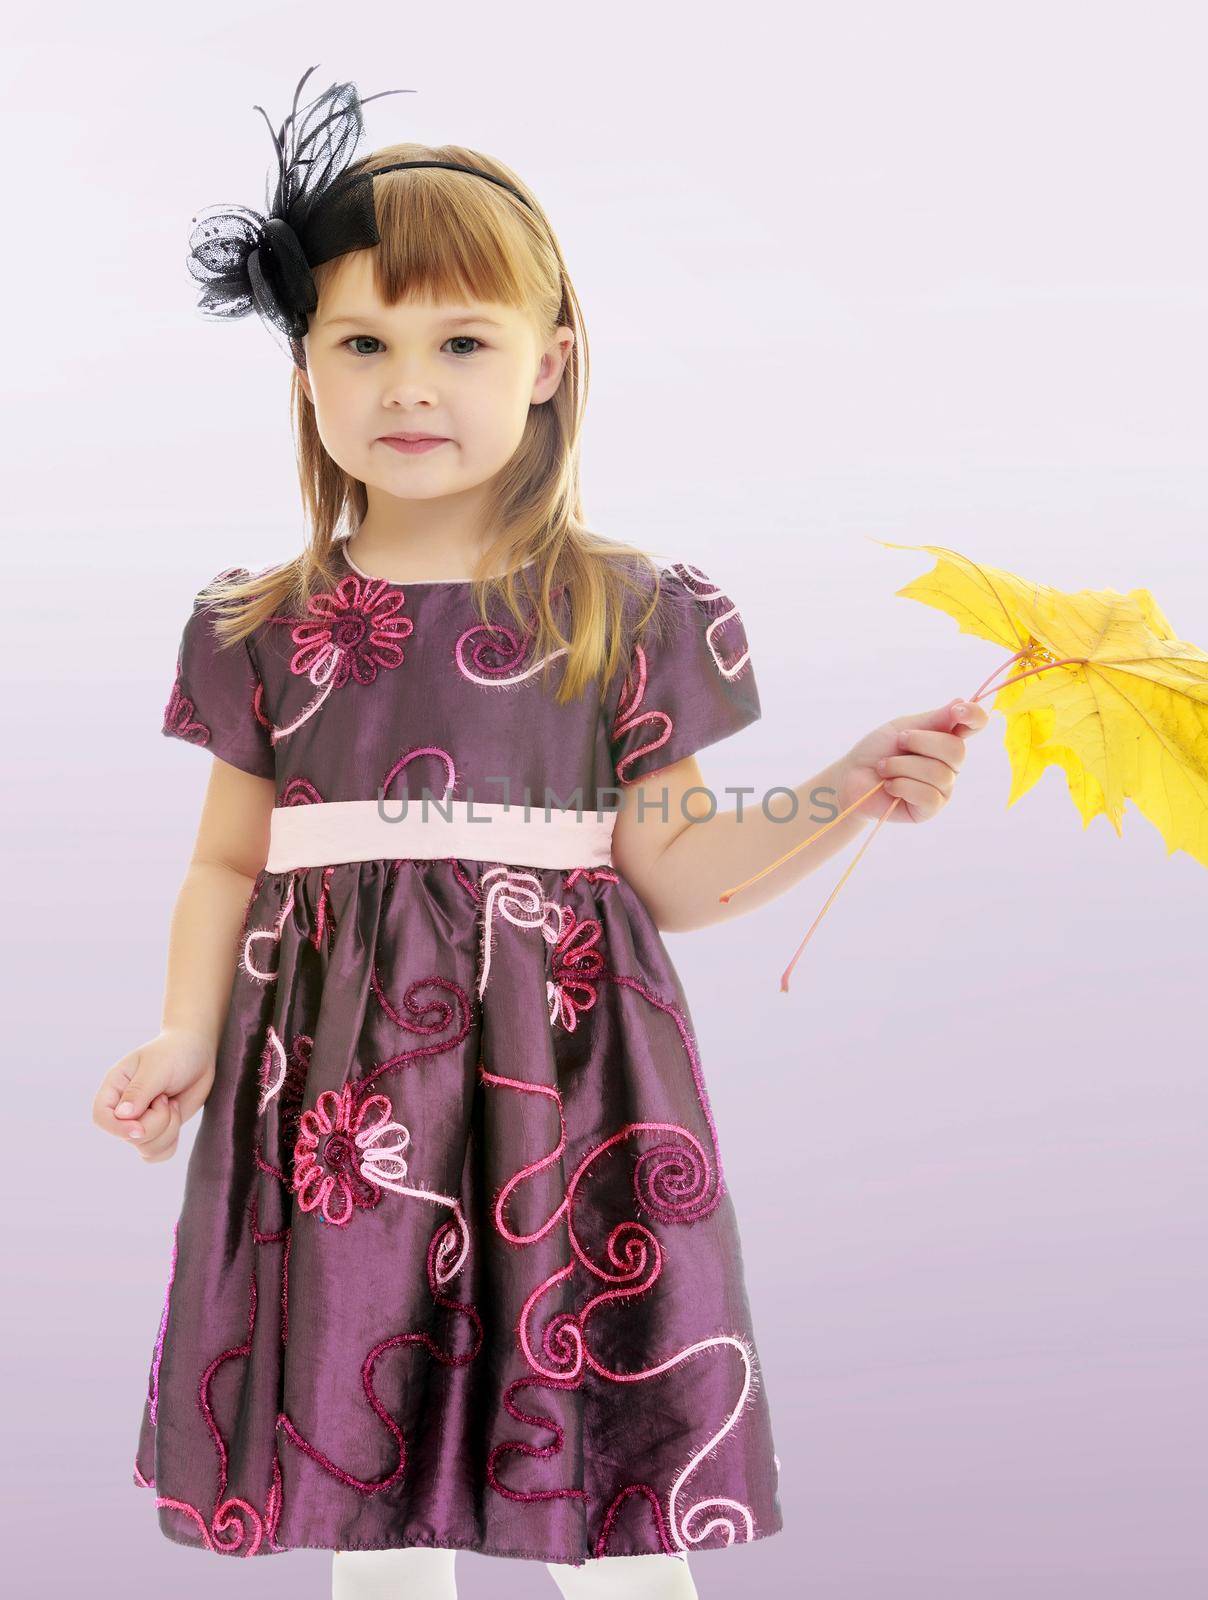 On a purple background, smooth transition from dark to light. Adorable little girl holding a maple leaf.